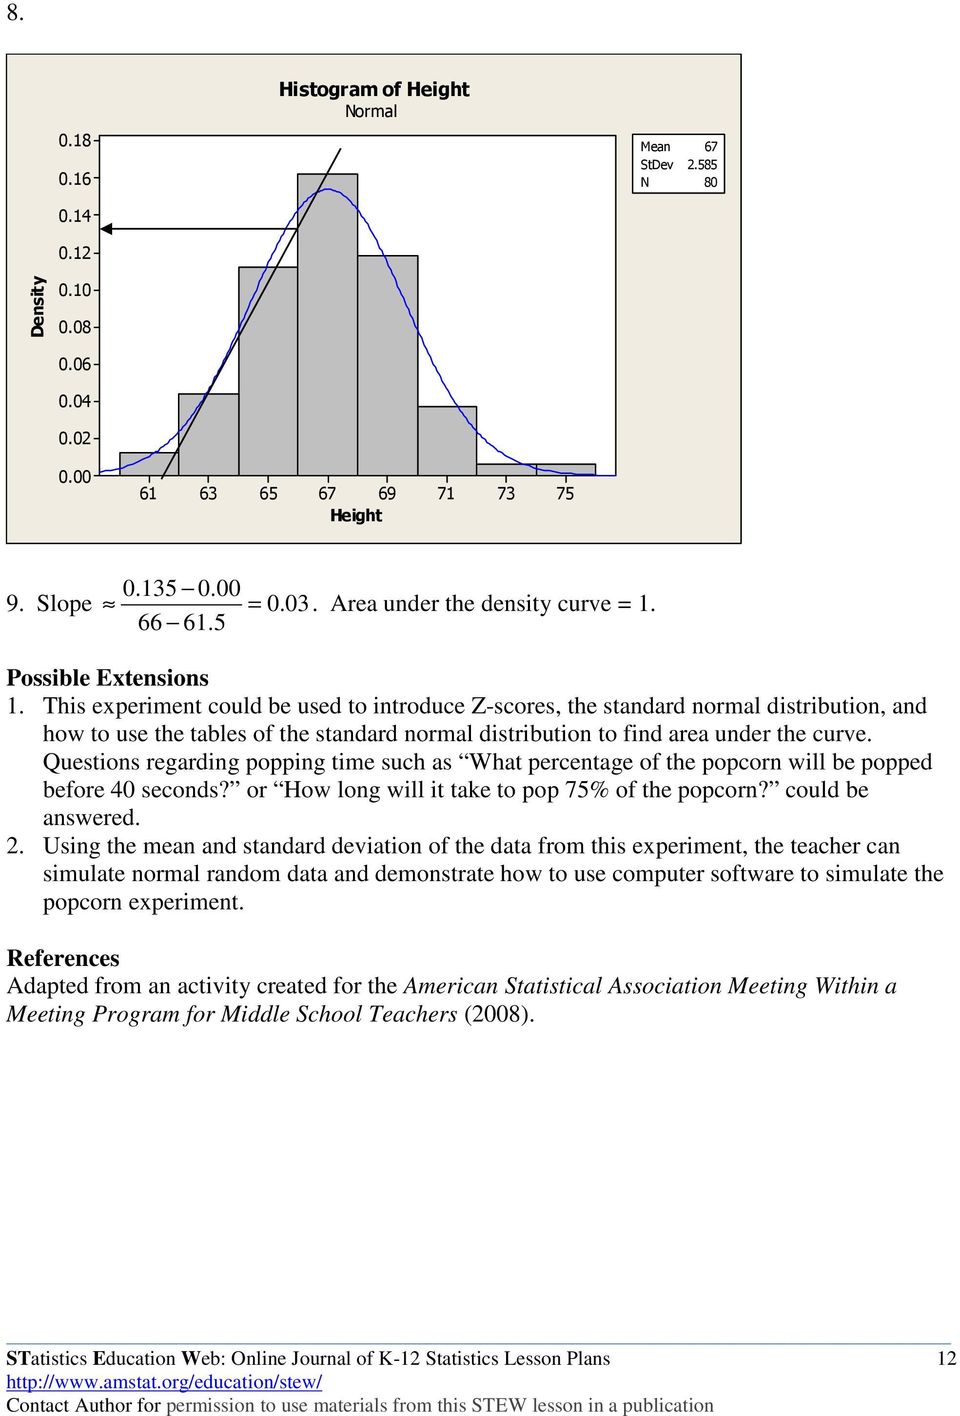 This experiment could be used to introduce Z-scores, the standard normal distribution, and how to use the tables of the standard normal distribution to find area under the curve.